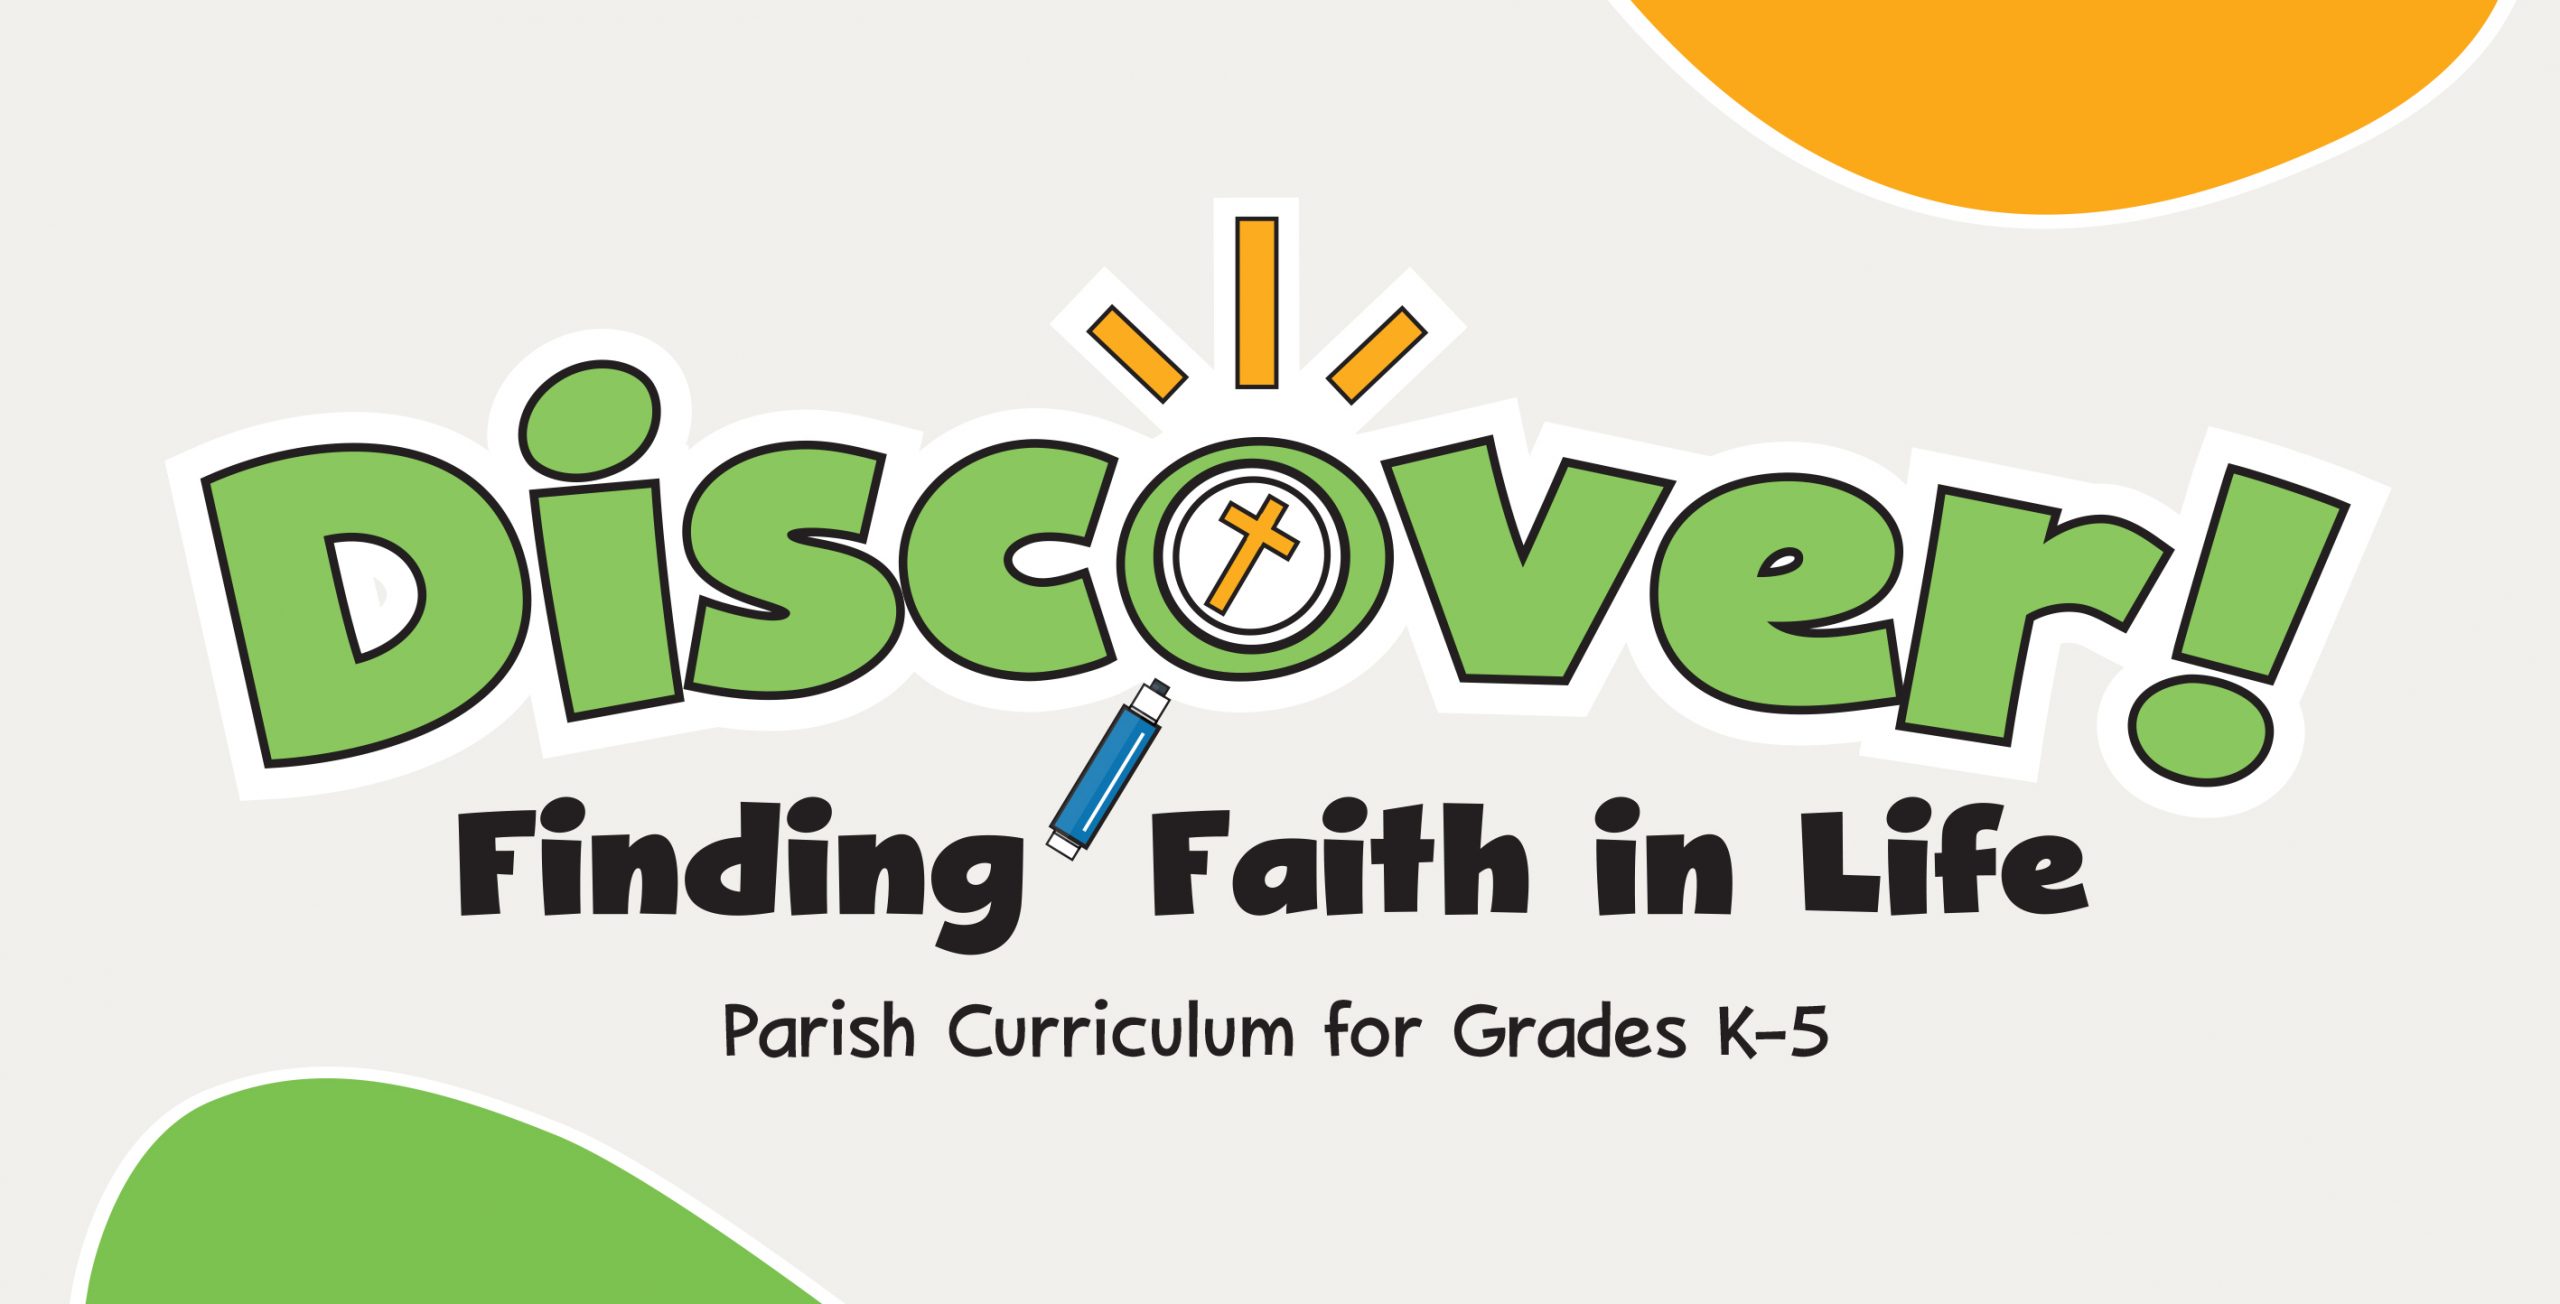 Discover! Finding Faith in Life: Parish Curriculum for Grades K–5